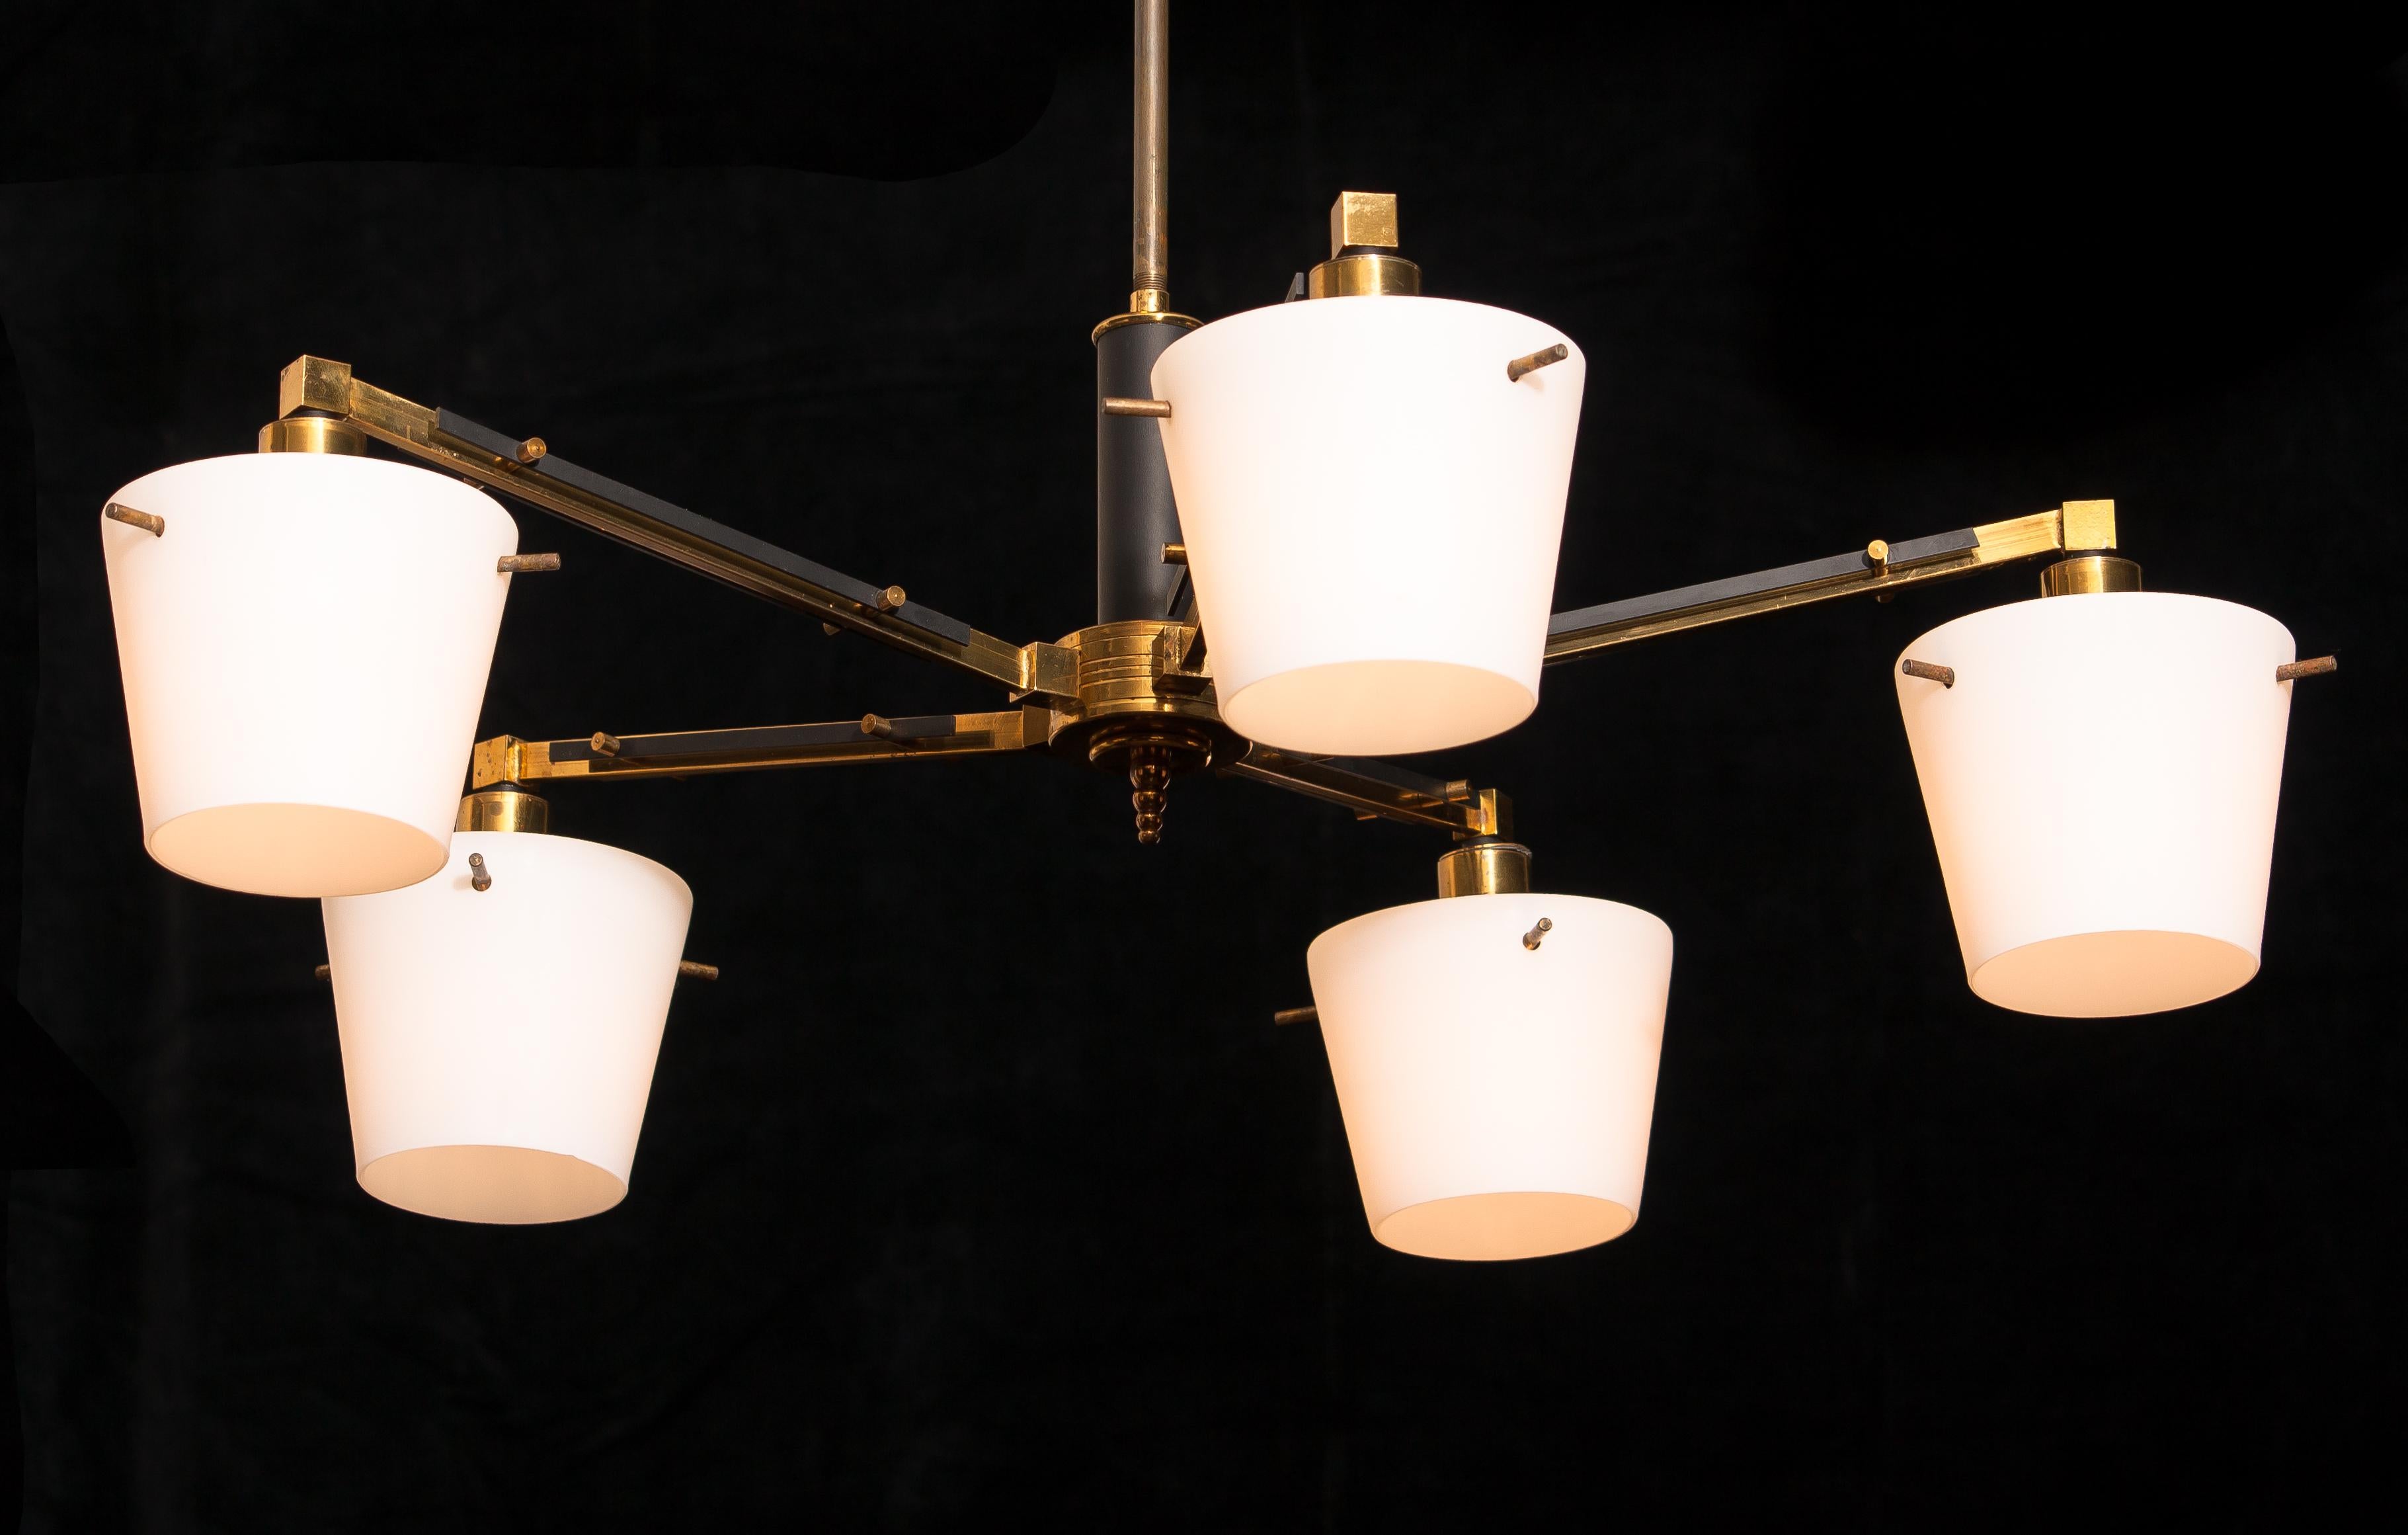 Beautiful and original midcentury chandelier with five Frosted white glass shades on a brass frame by Stilnovo Italy. Period: 1950s. Five lights.
Technical 100% / E14 / 17.
The dimensions are: ø of the fixture, 65 cm / 26 inch. Total height 70 cm